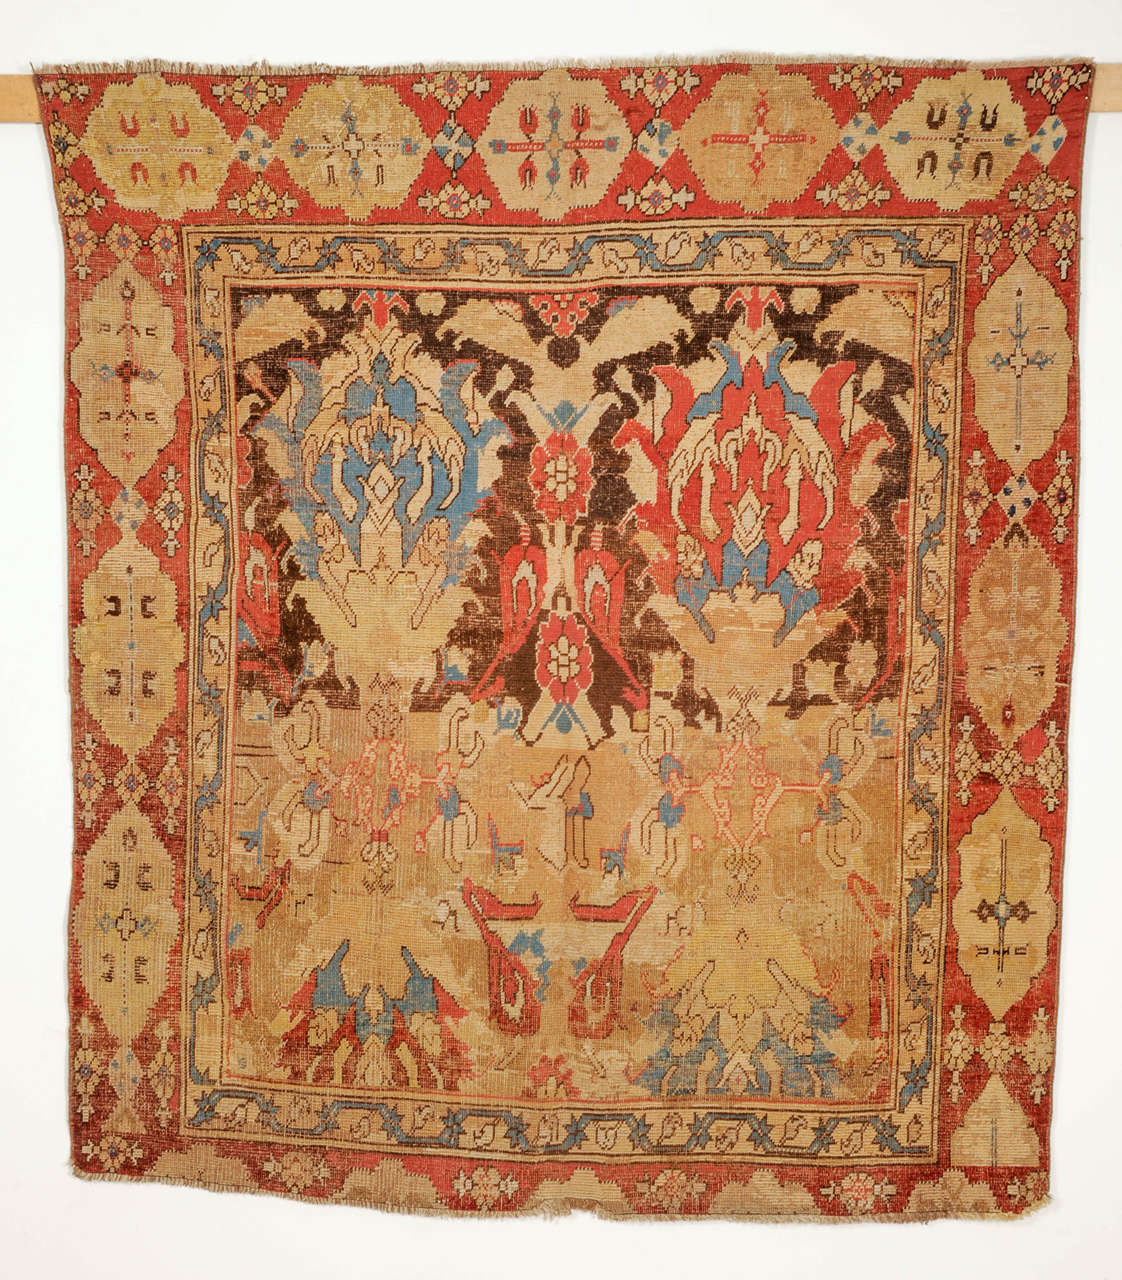 A rare and antique so-called 'Smyrna' carpet, distinguished by an allover pattern consisting of four oversize palmettes arranged in mirror image, framed by an oblong cartouche border typical of 17th century 'Transylvanian' Ottoman carpets. Carpets